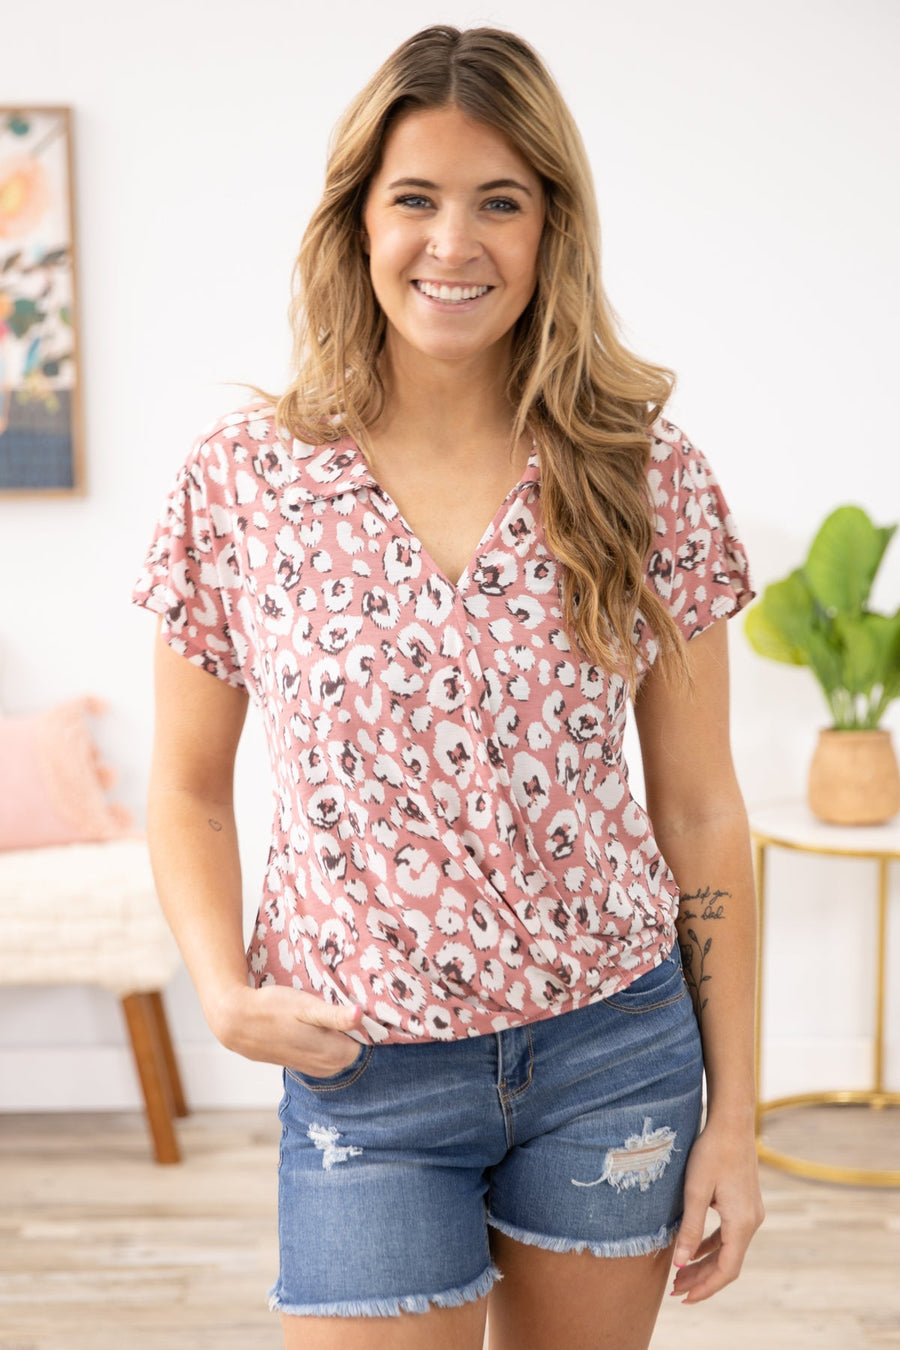 Dusty Rose and Ivory Animal Print Top - Filly Flair